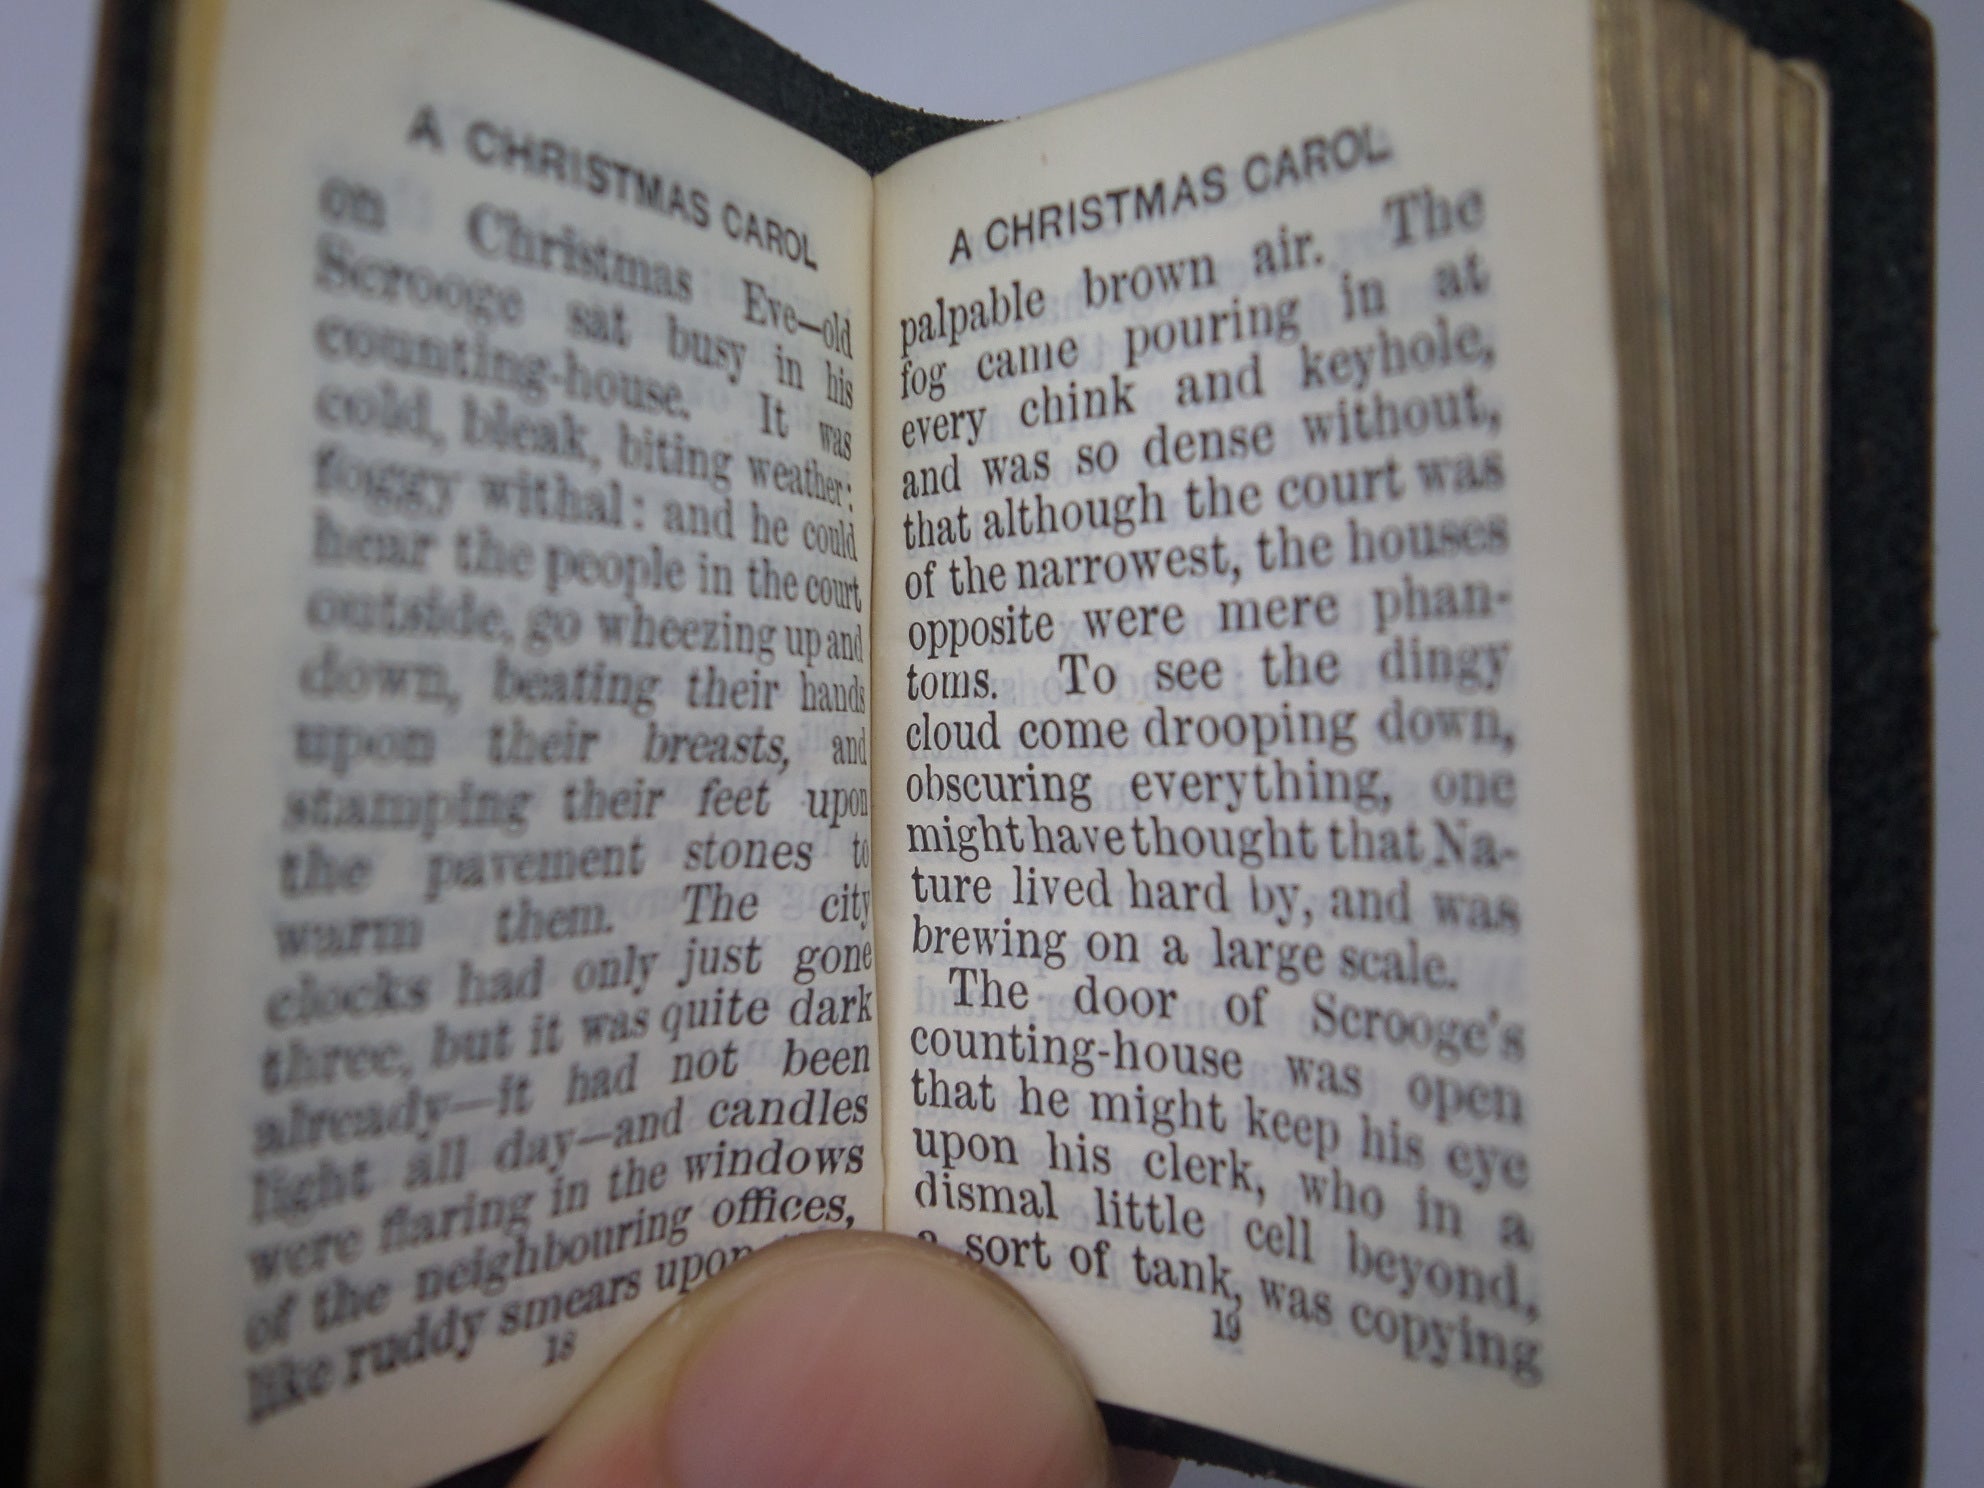 A CHRISTMAS CAROL BY CHARLES DICKENS 1904 MINIATURE EDITION, LEATHER BINDING